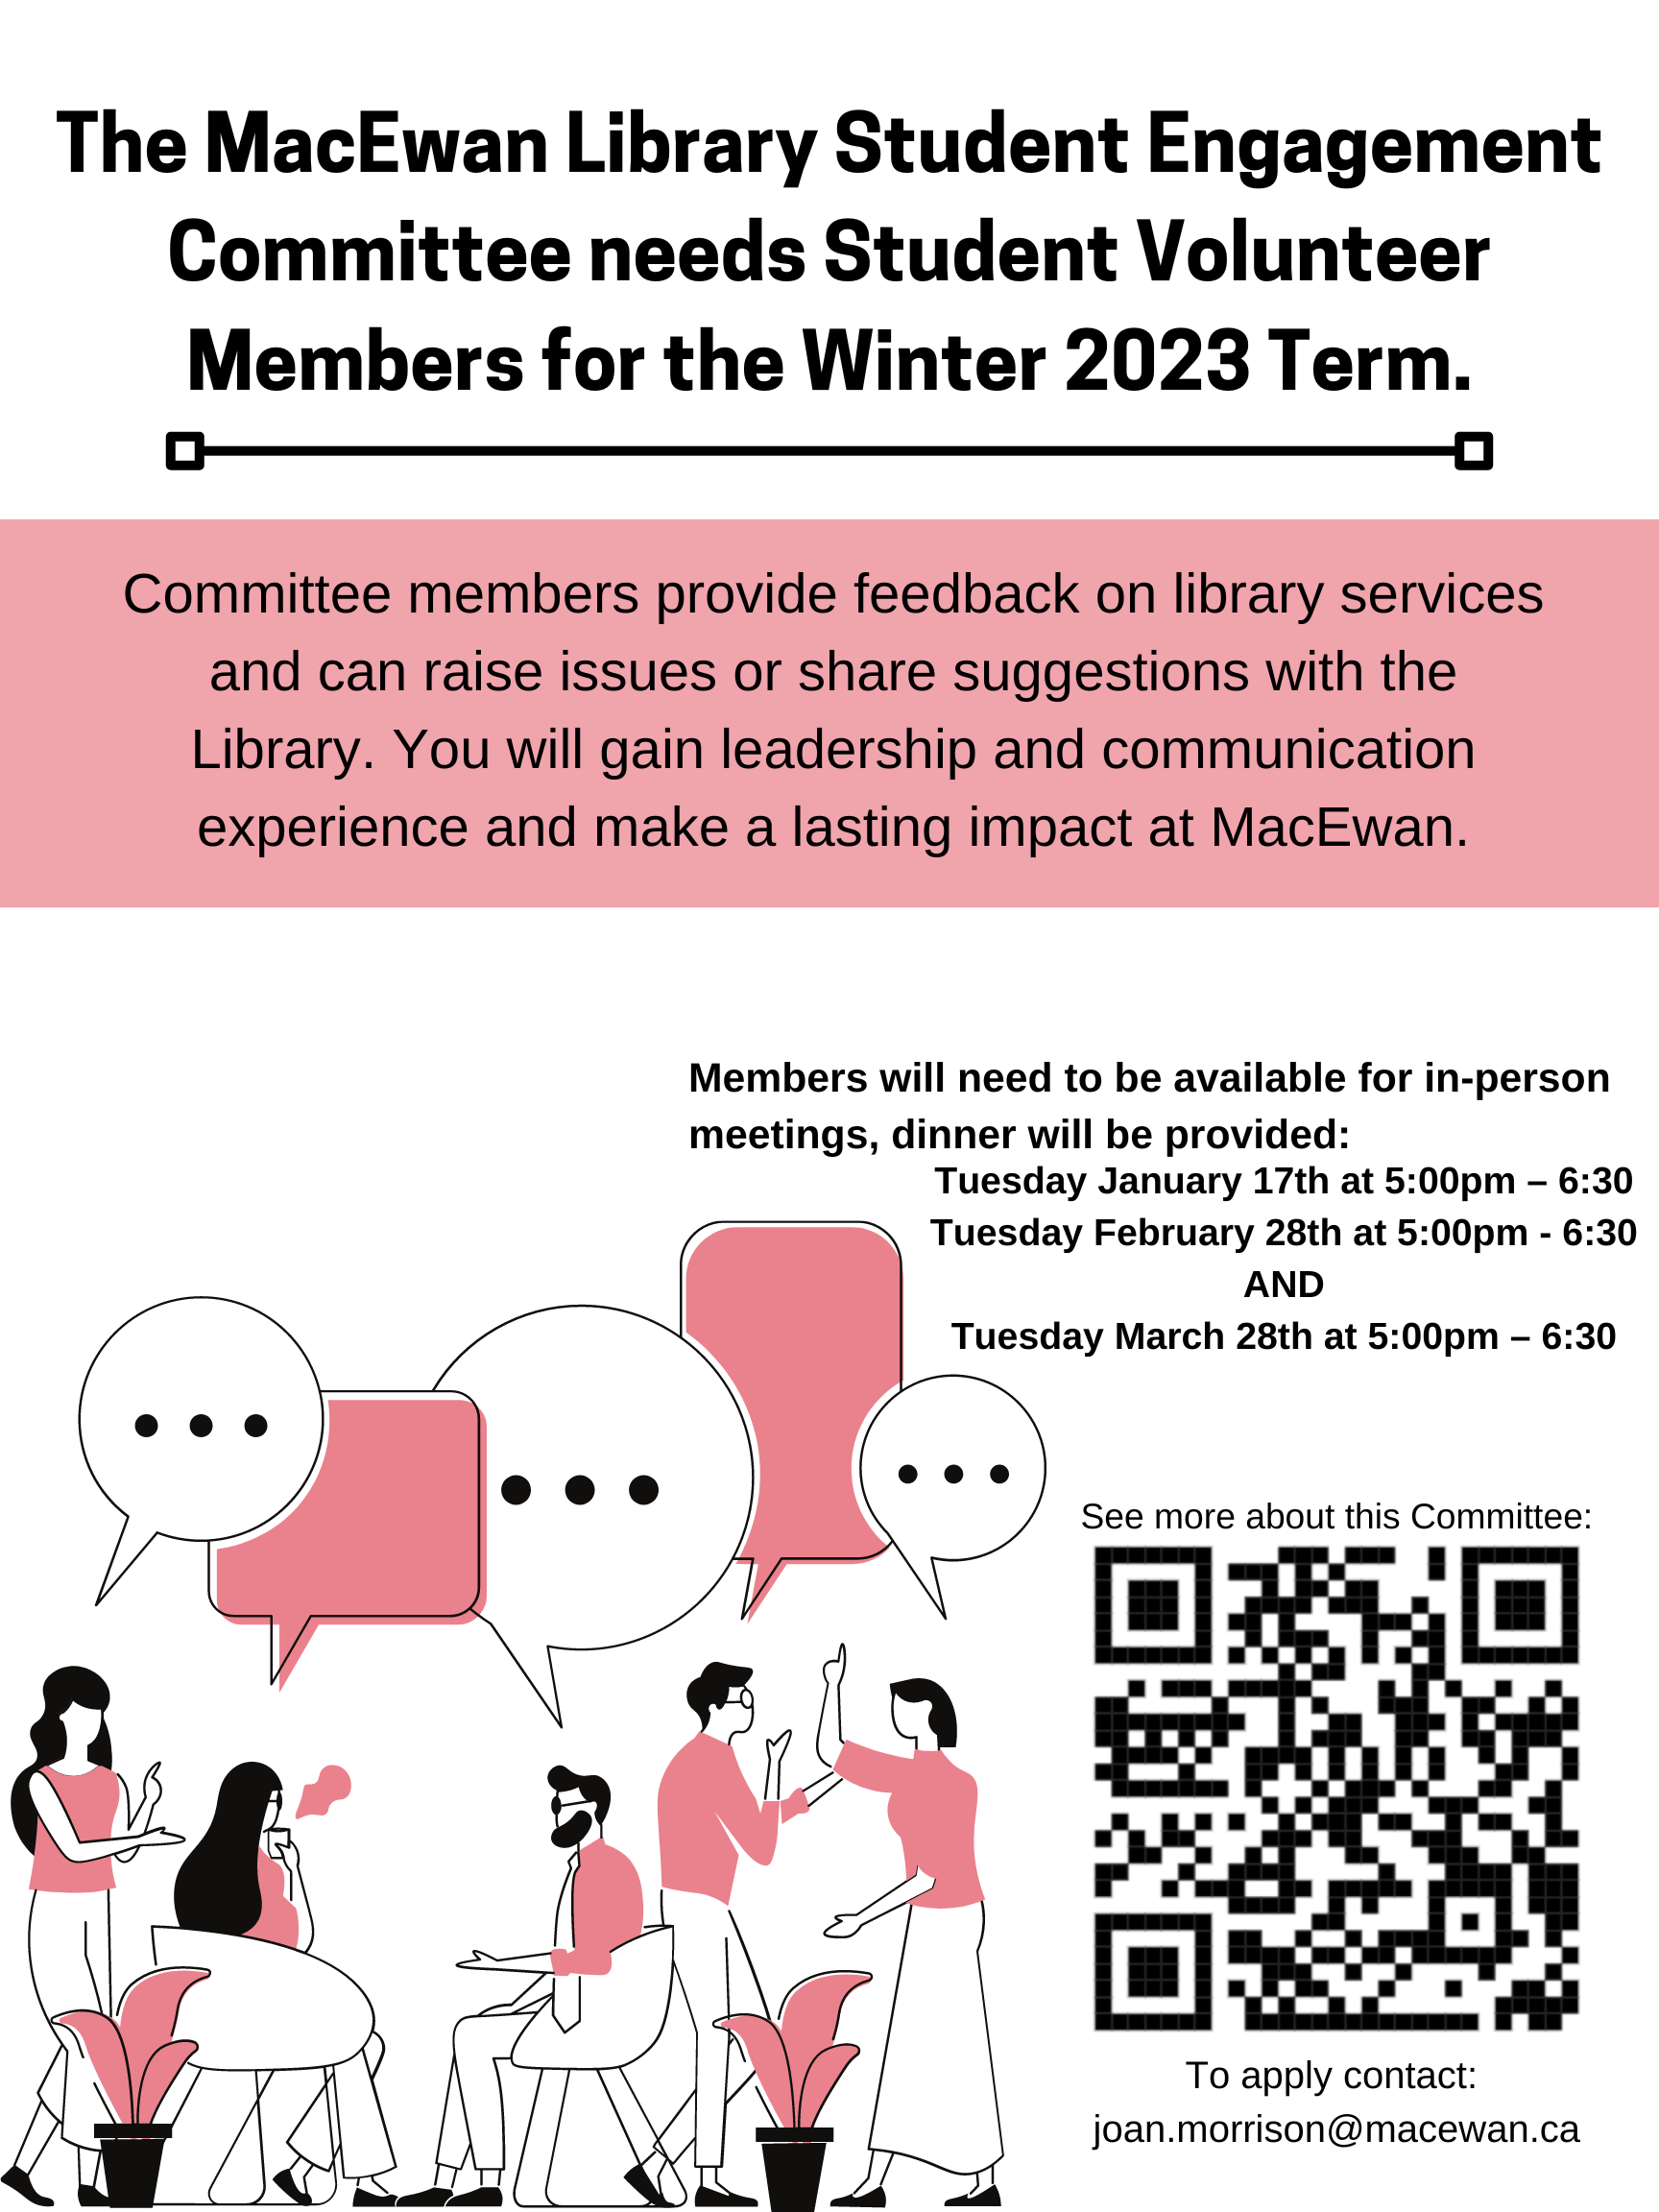 Poster advertising the MacEwan Library Student Engagement Committee, asking for student volunteers for Winter 2023.